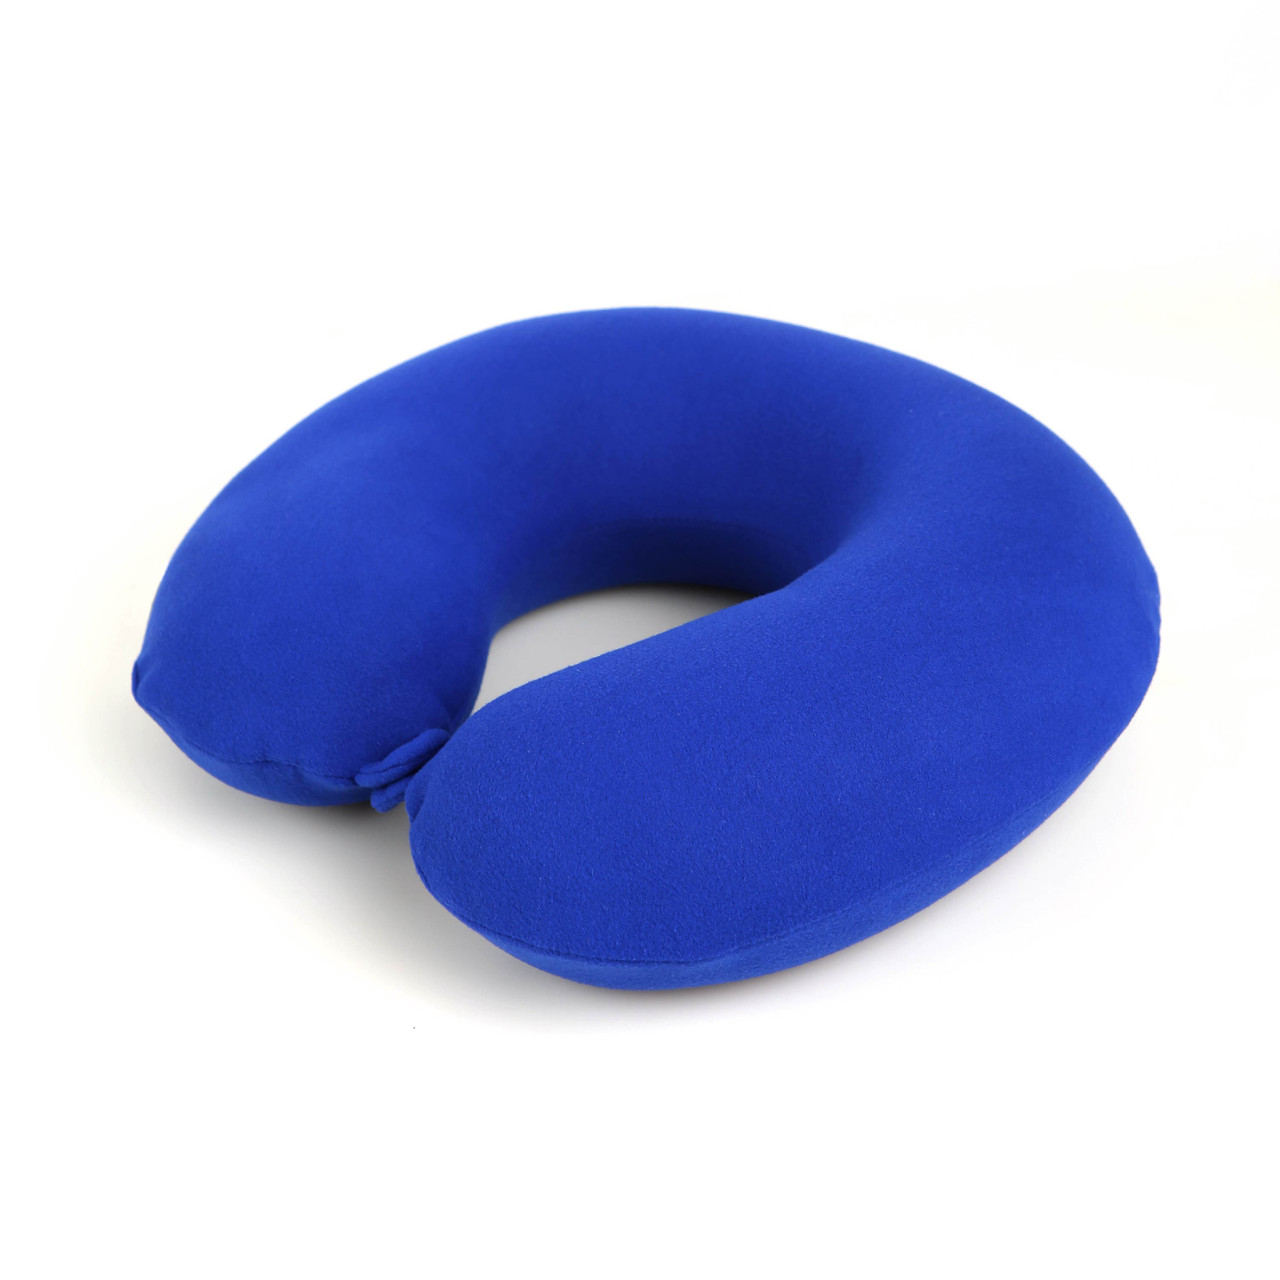 Cushie Pillows Memory Foam Neck Pillow with Removable Cover